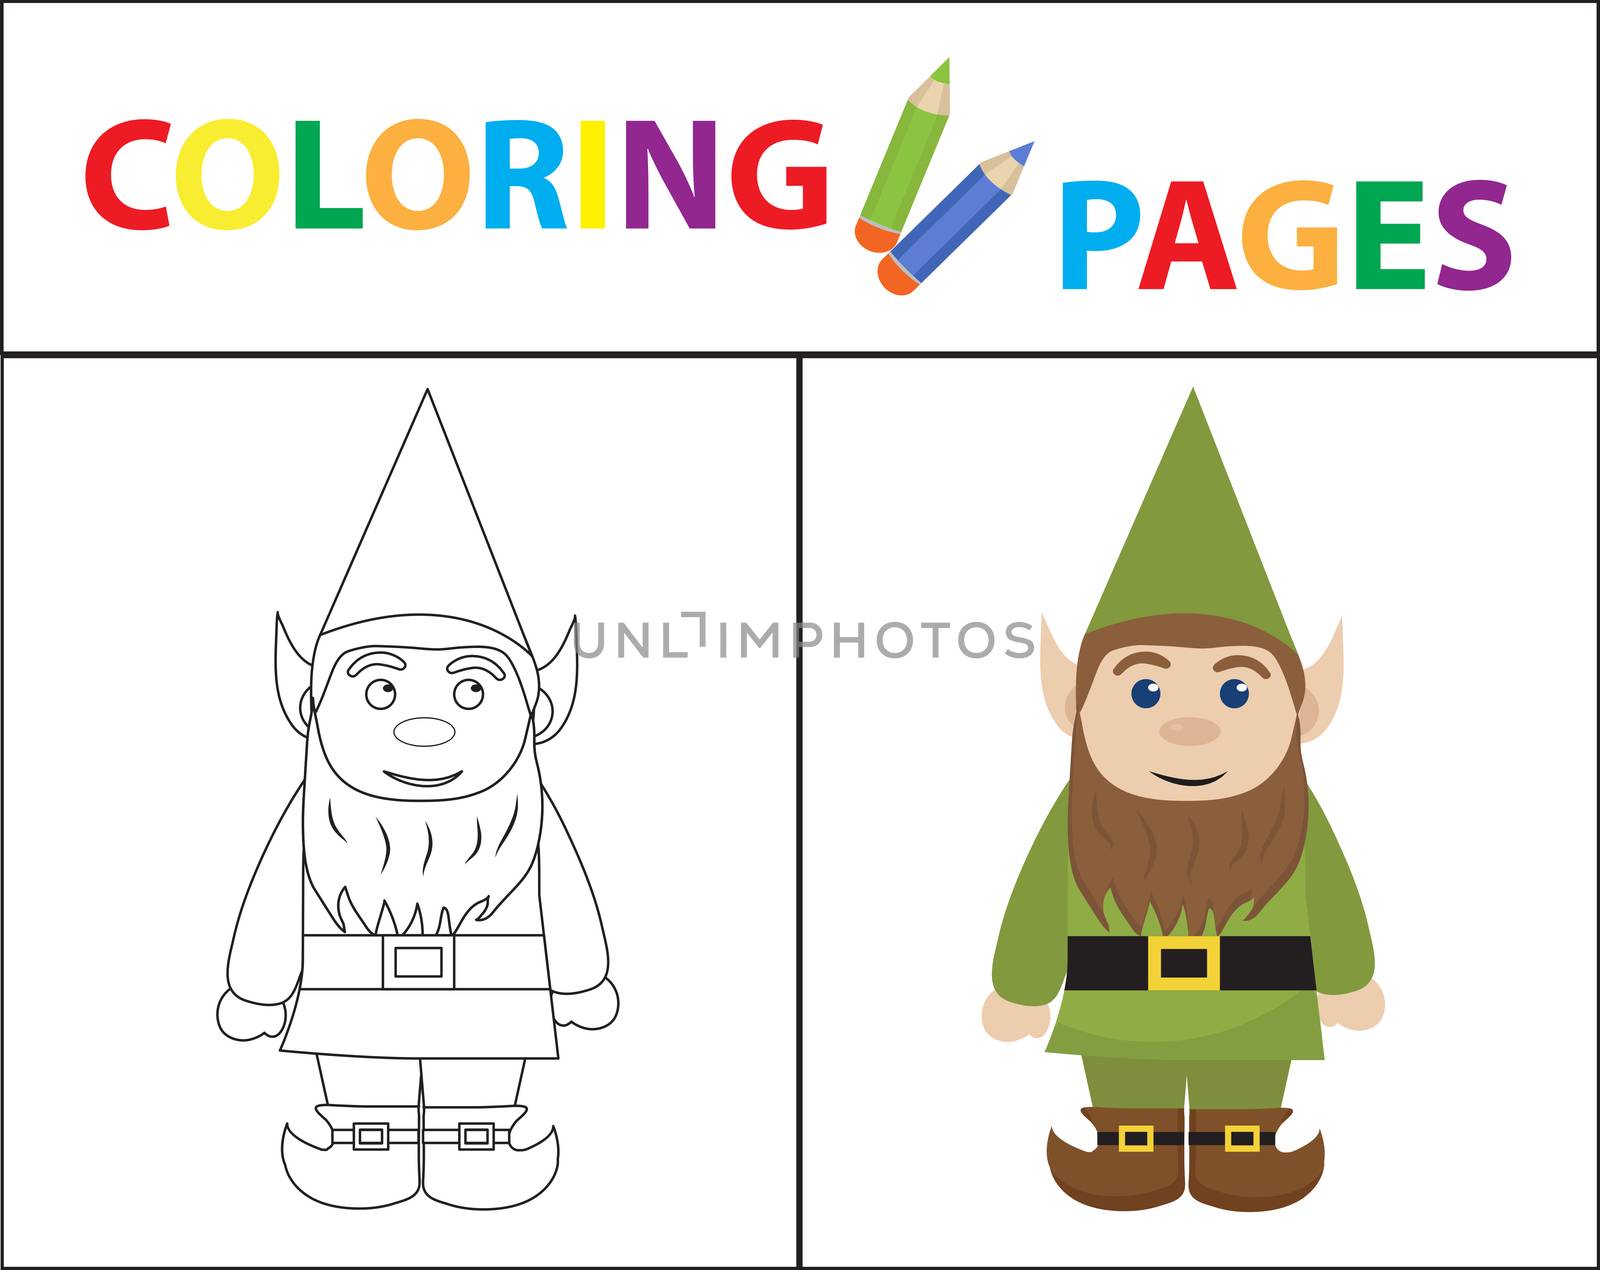 Coloring book page for kids. Forest gnome. Sketch outline and color version. Childrens education. illustration